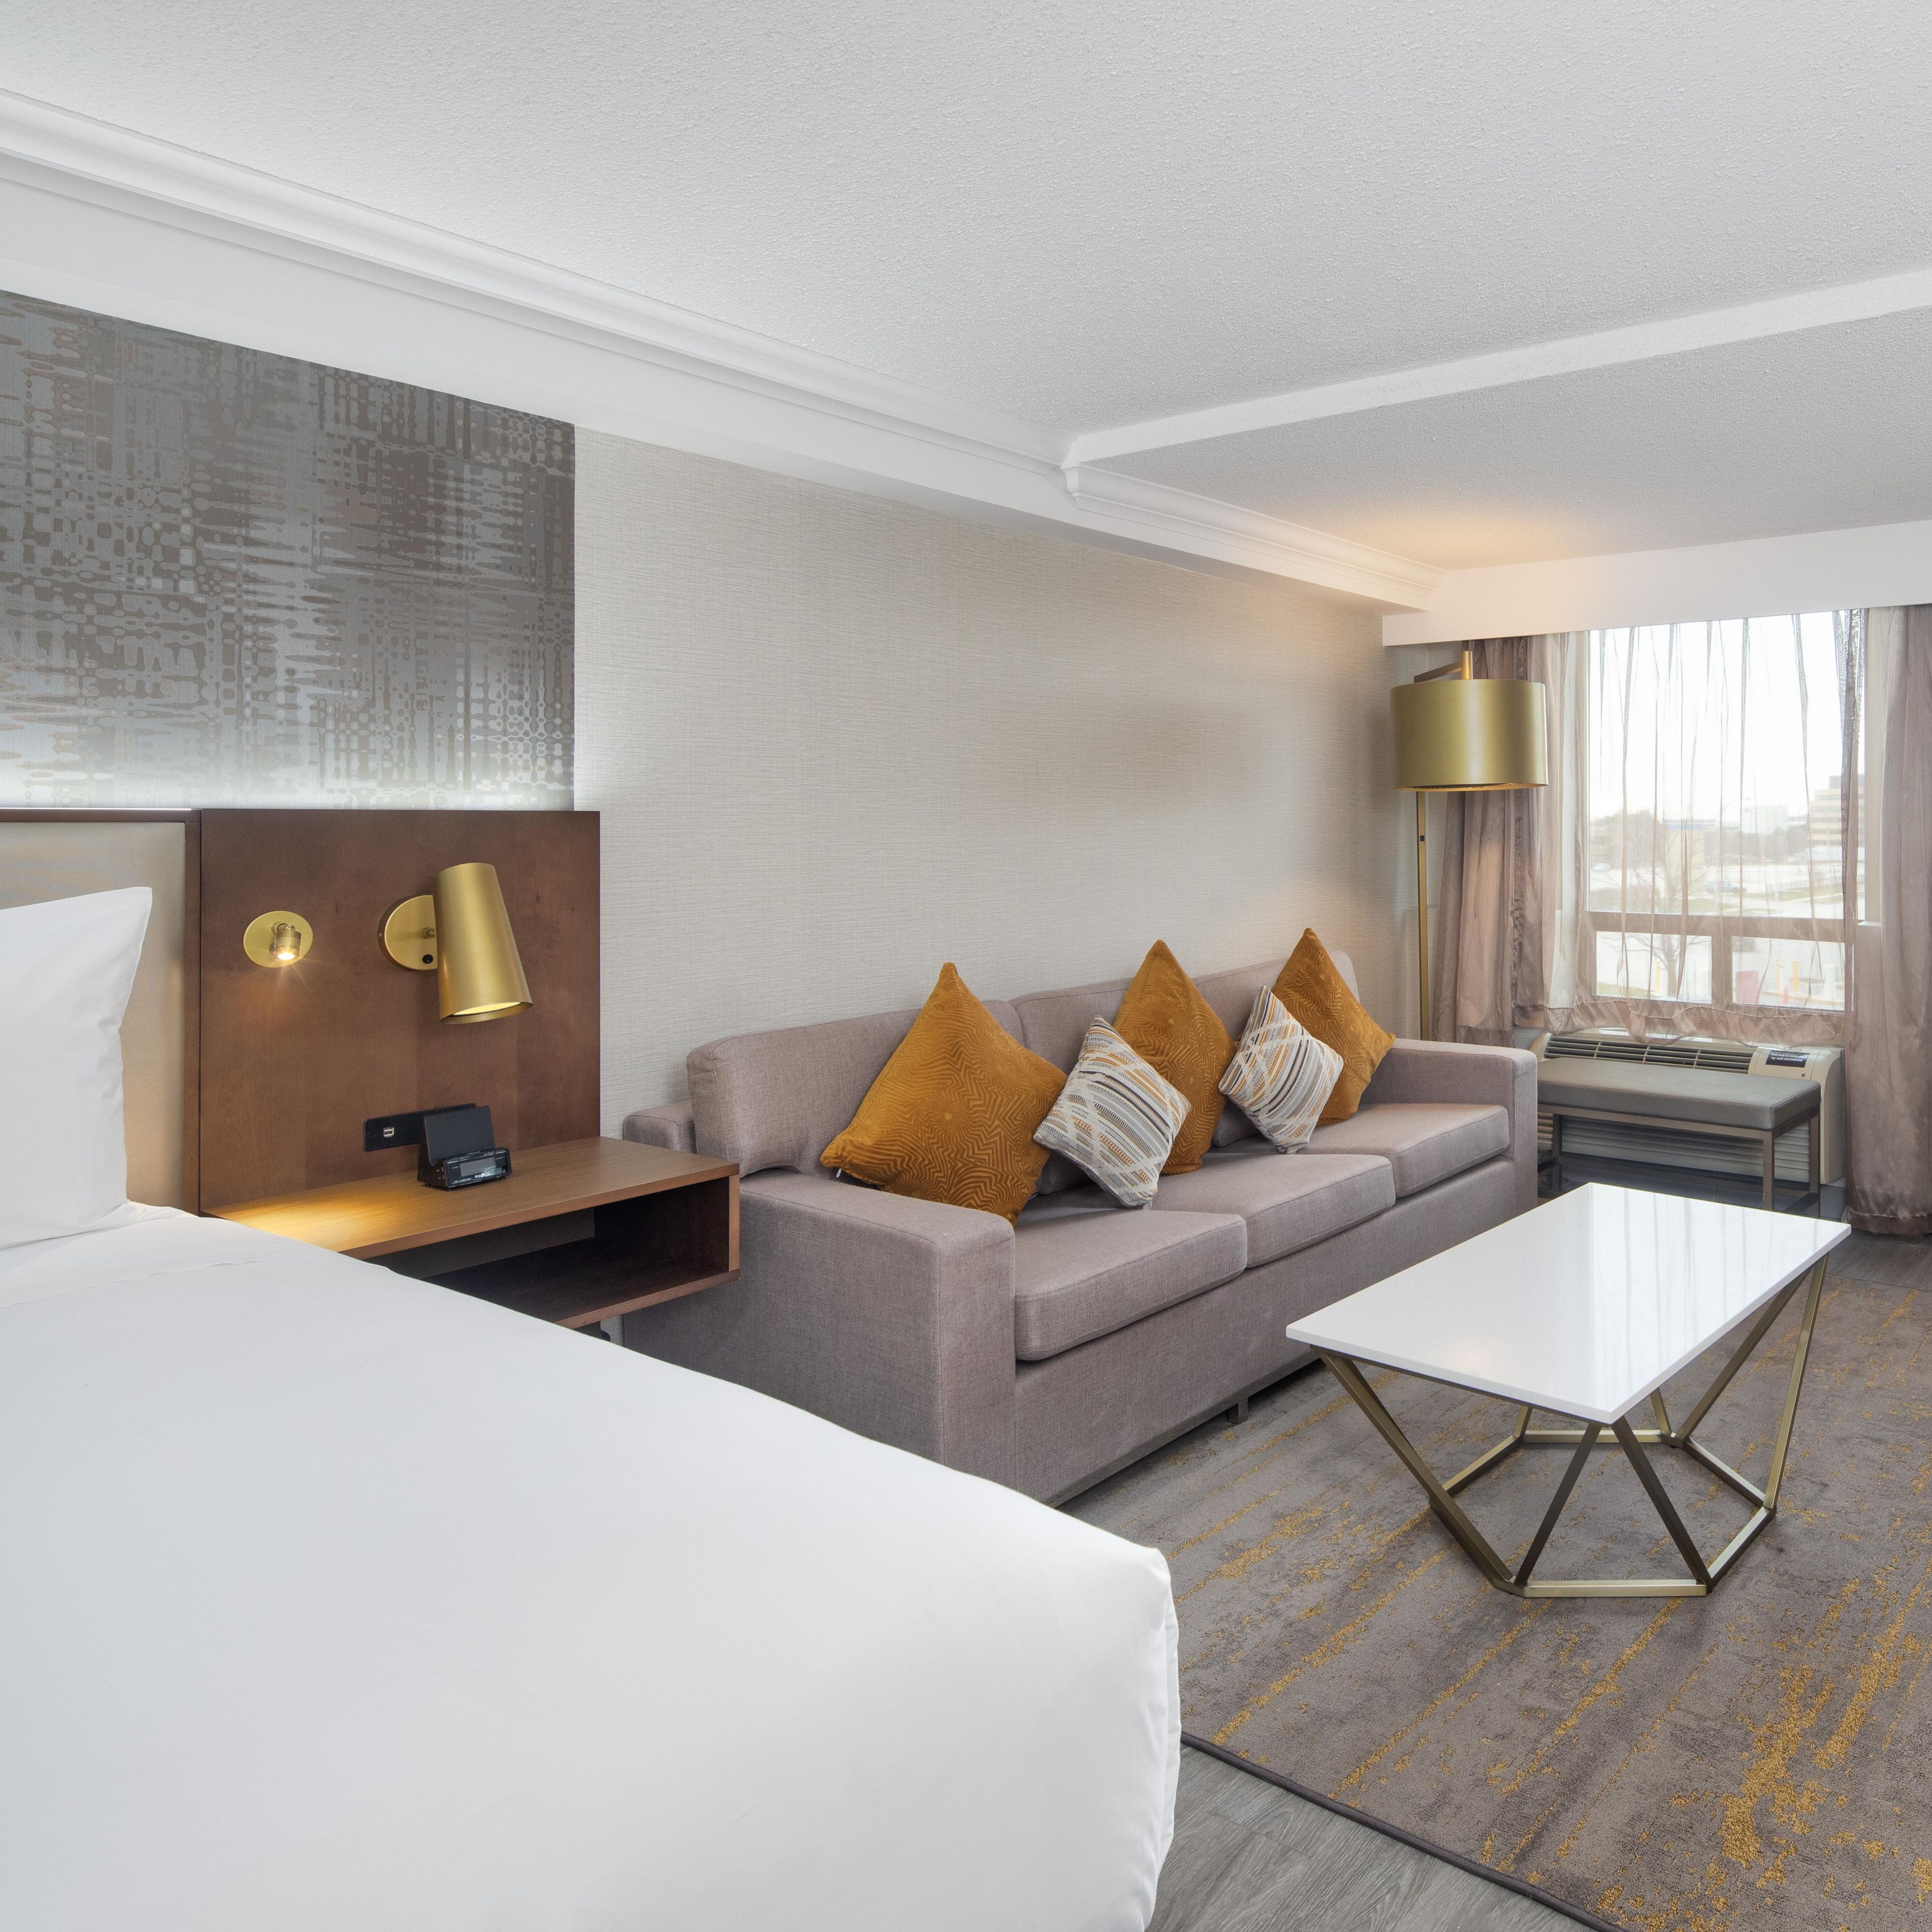 For extra space to relax, book our King Executive Room